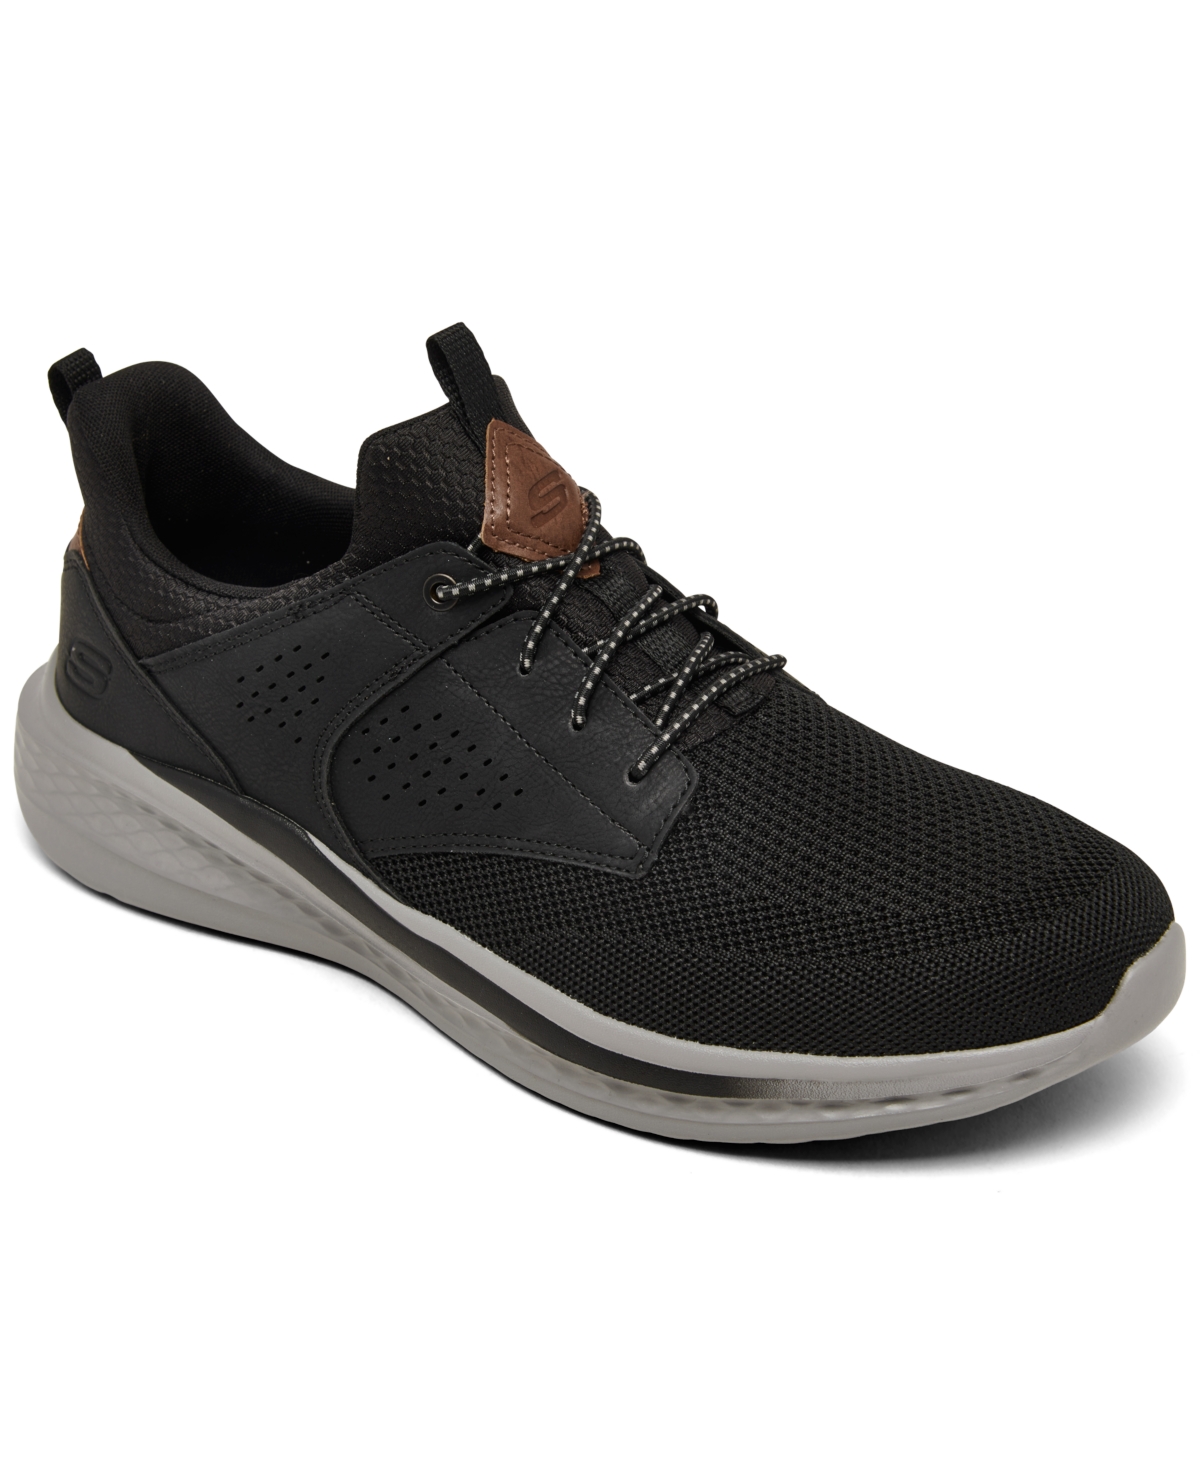 Men's Relaxed Fit: Slade - Breyer Casual Sneakers from Finish Line - Black/black